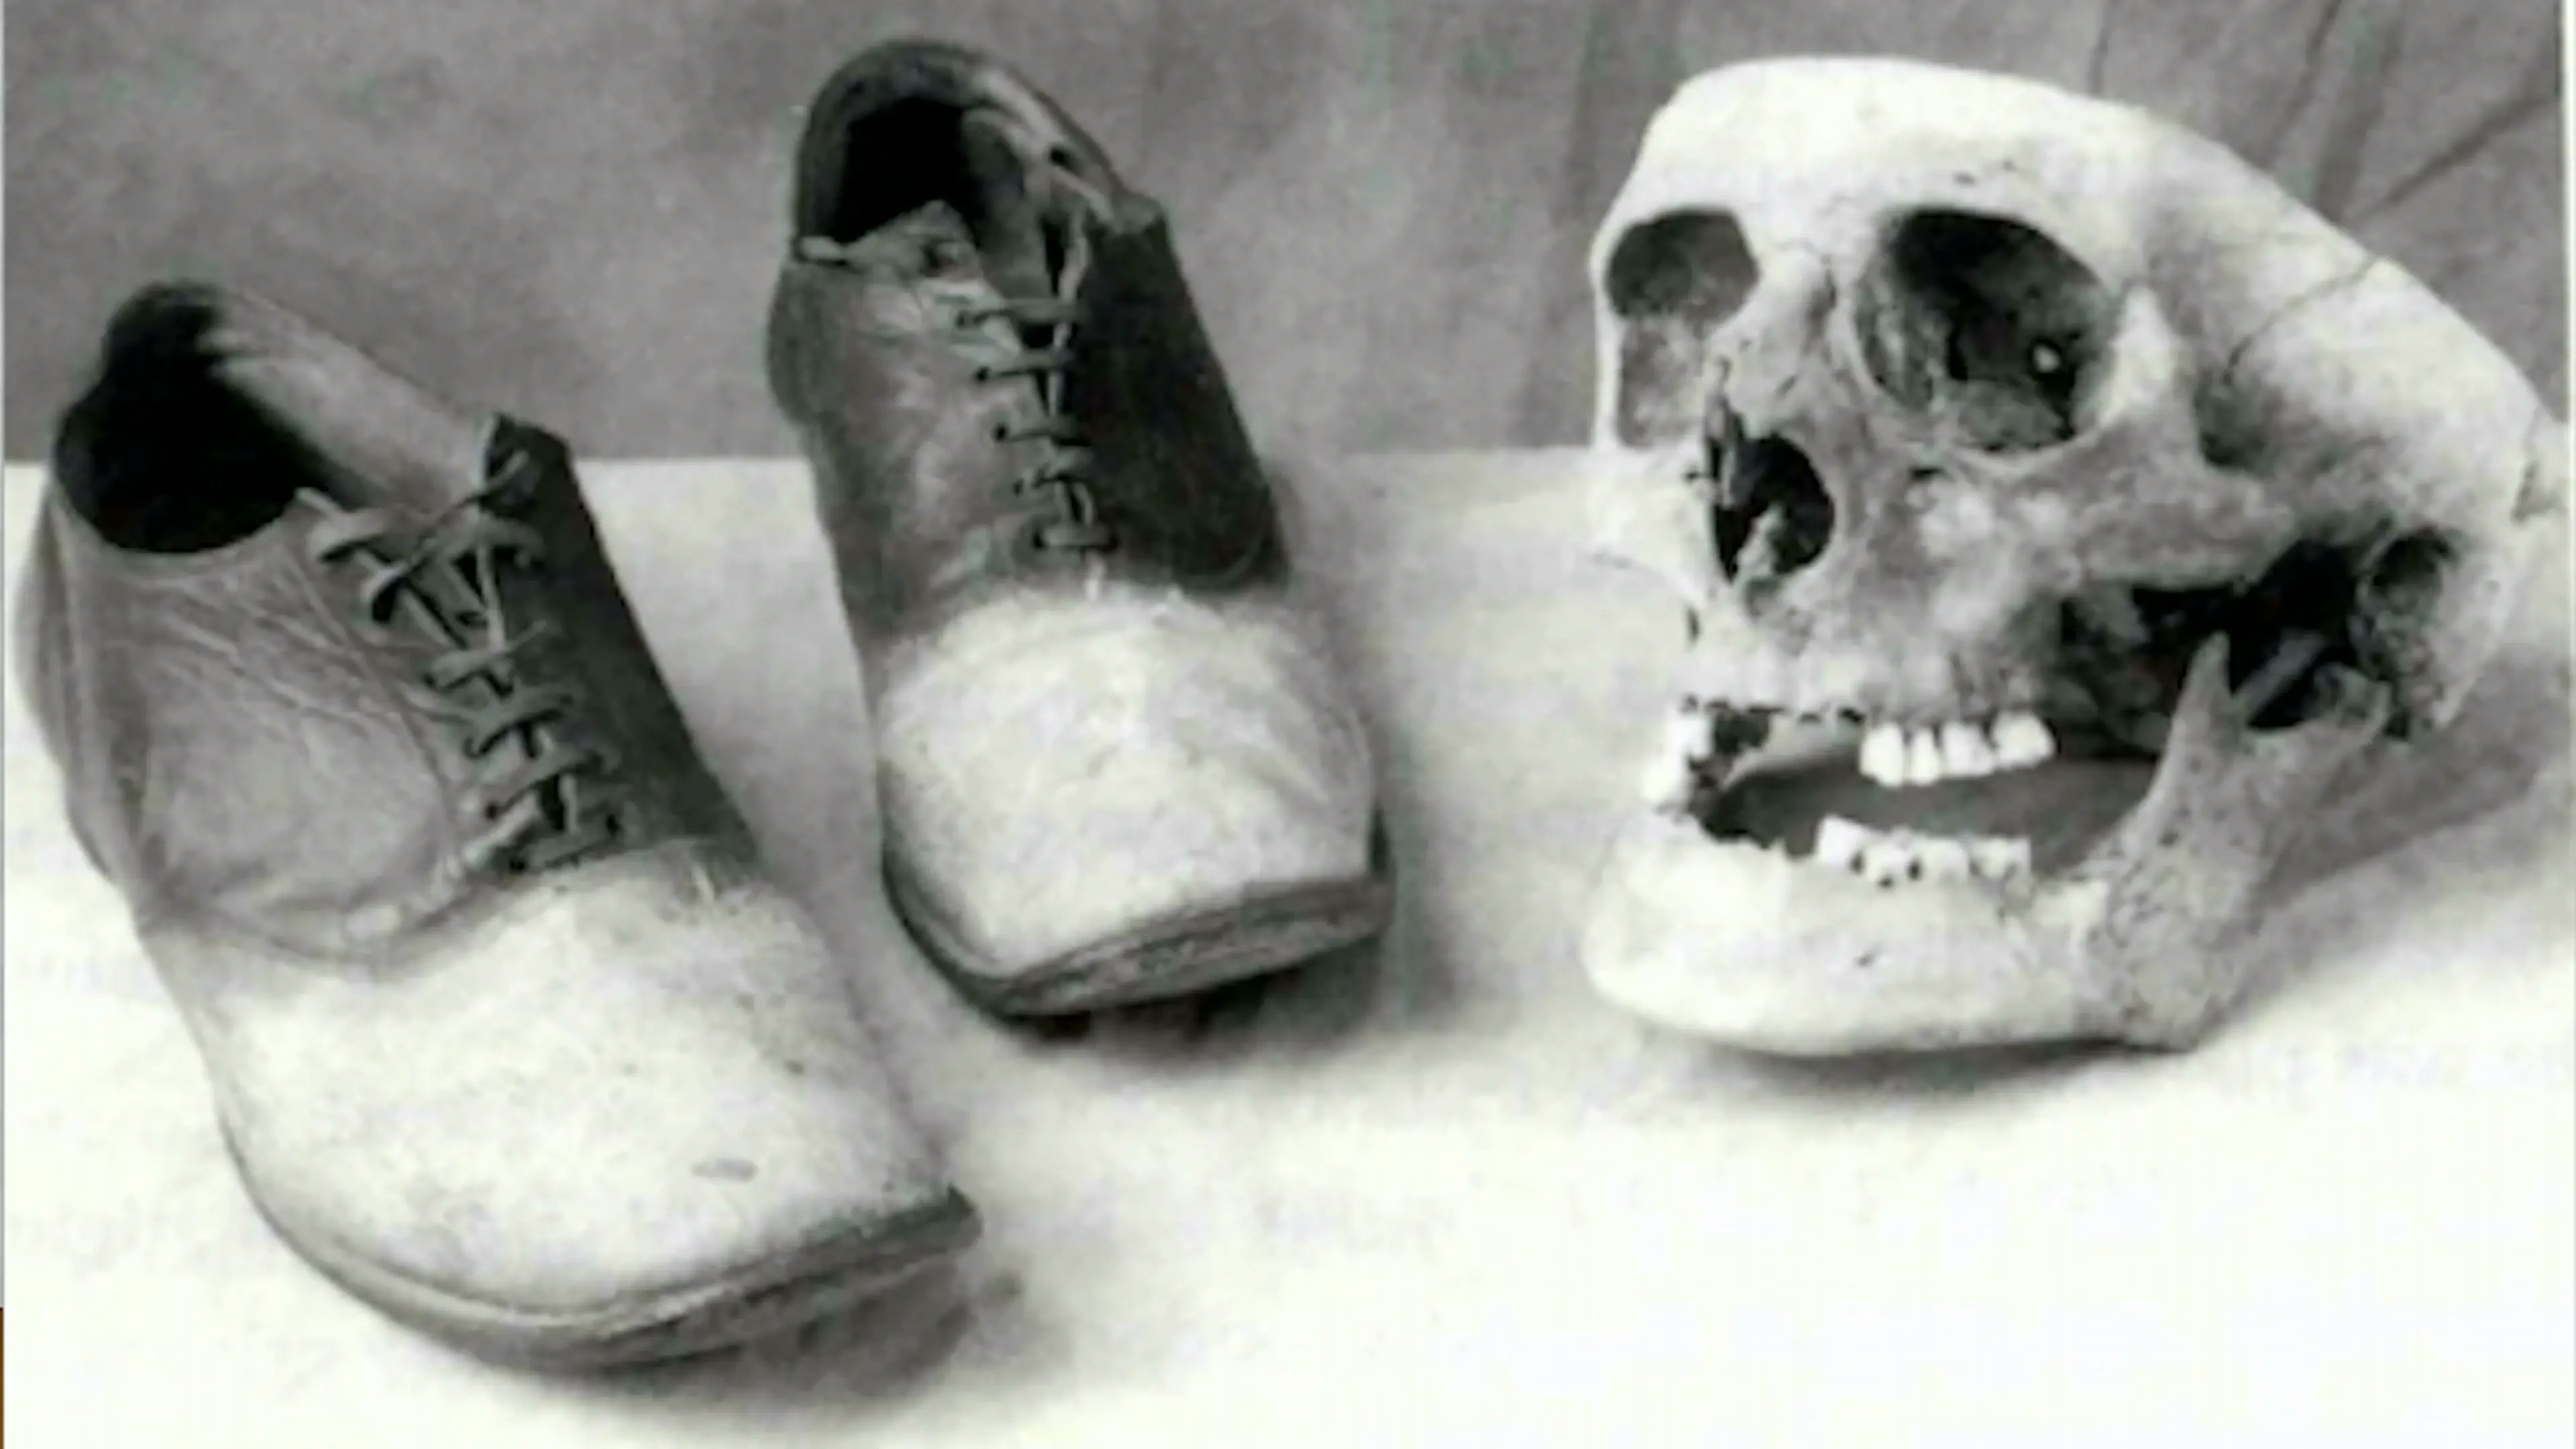 Wyoming outlaw George "Big Nose" Parrott would have his skin made into a pair of shoes for the eventual governor of the state of Wyoming. The shoes are still at the Carbon County Museum in Rawlins, along with the outlaw's skull.